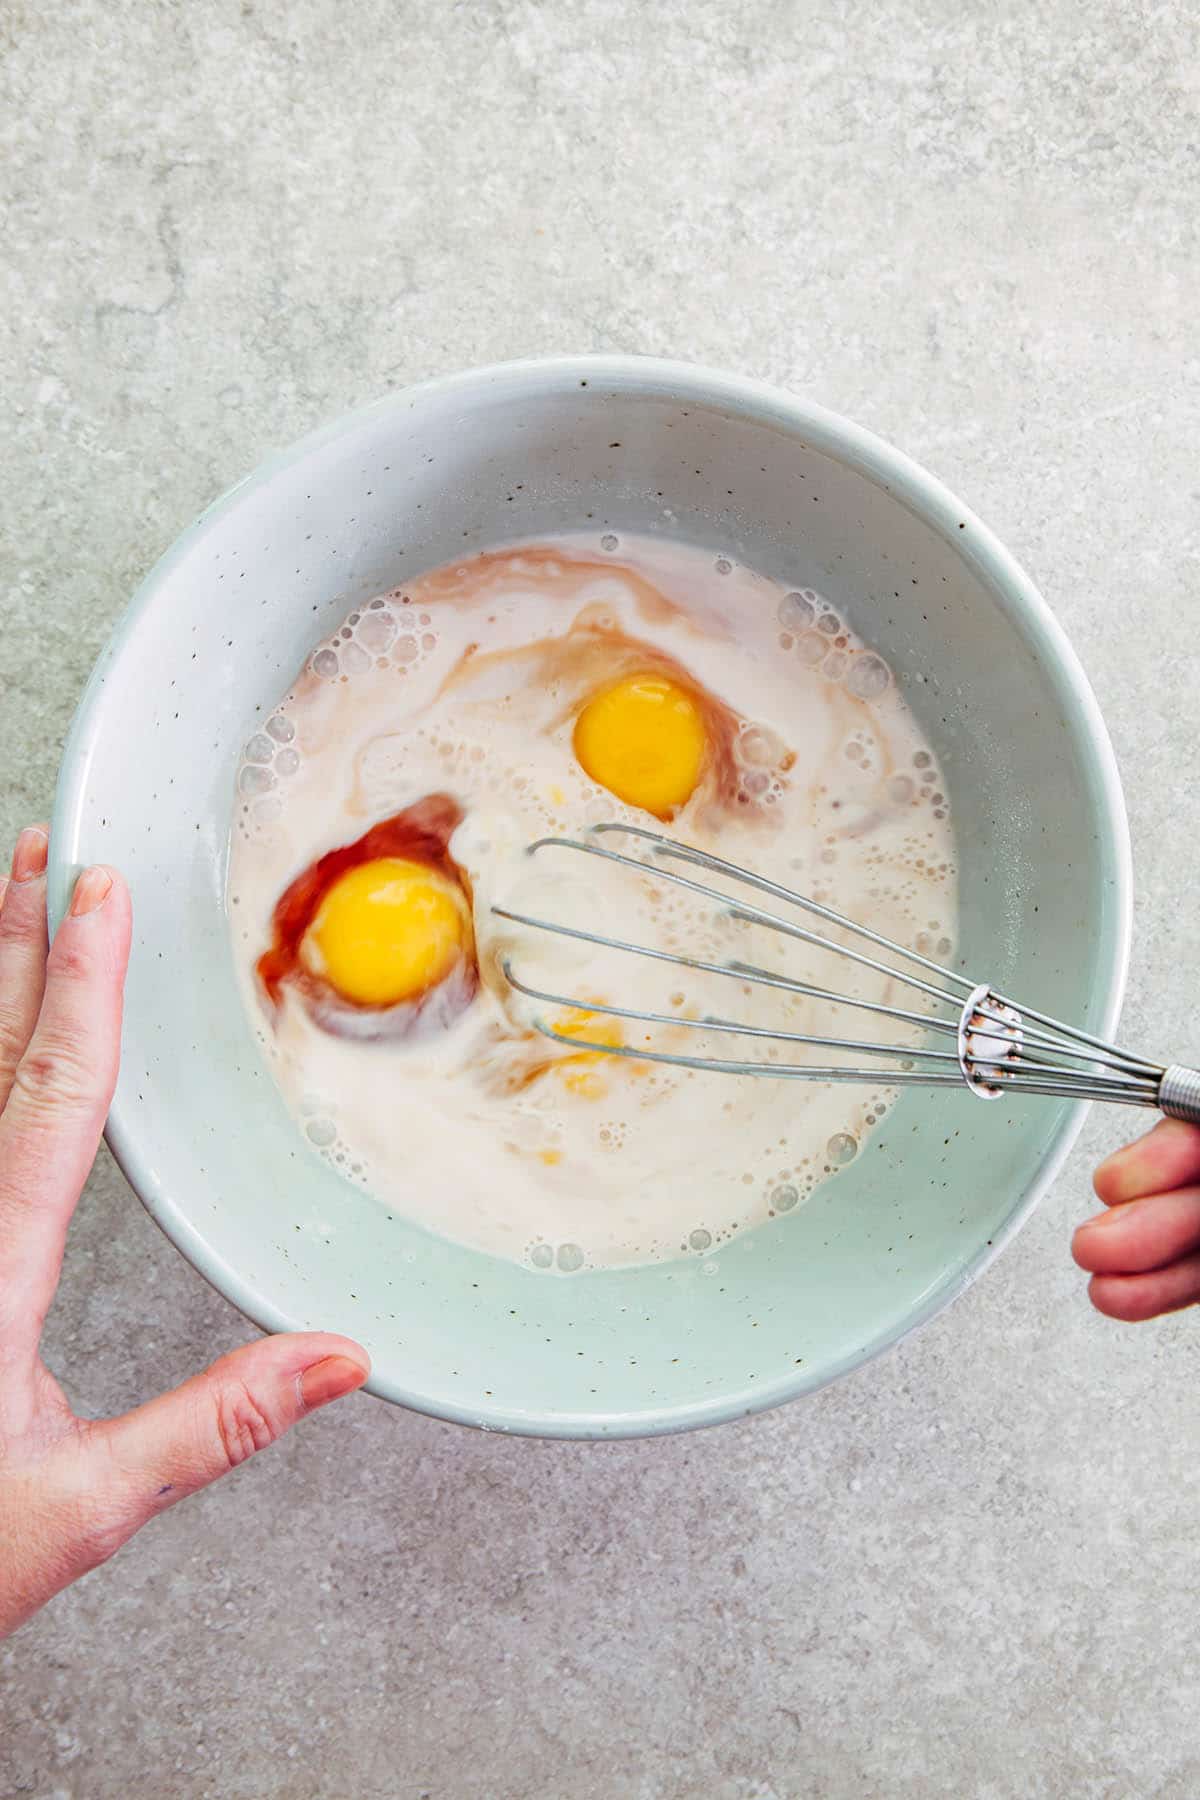 A hand using a small metal whisk to mix egg into batter.